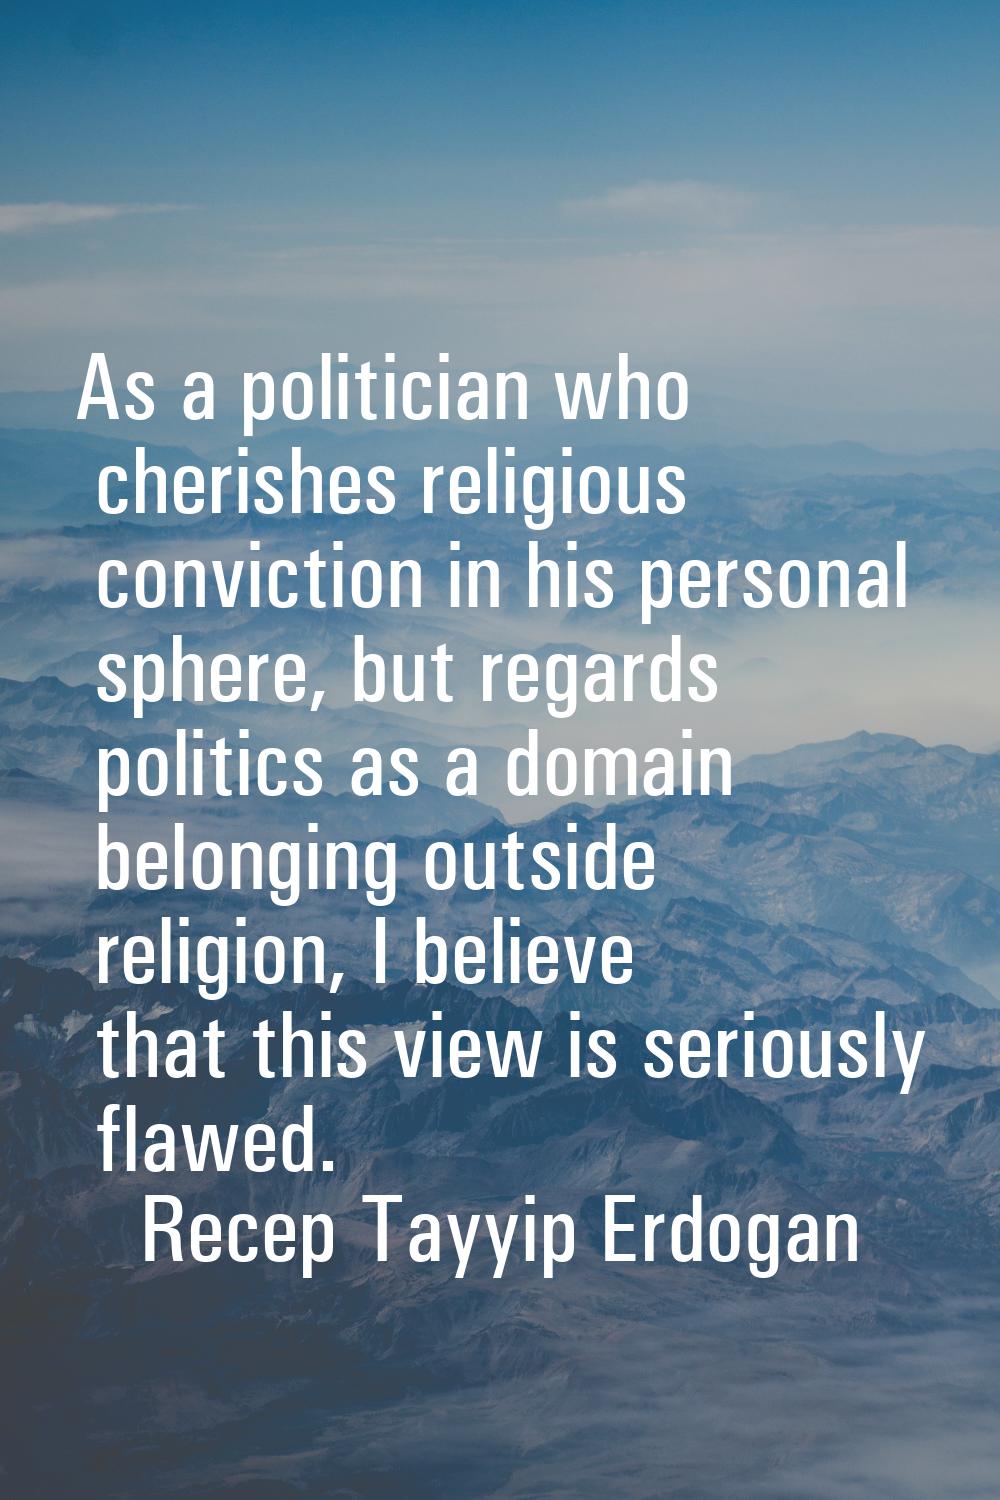 As a politician who cherishes religious conviction in his personal sphere, but regards politics as 